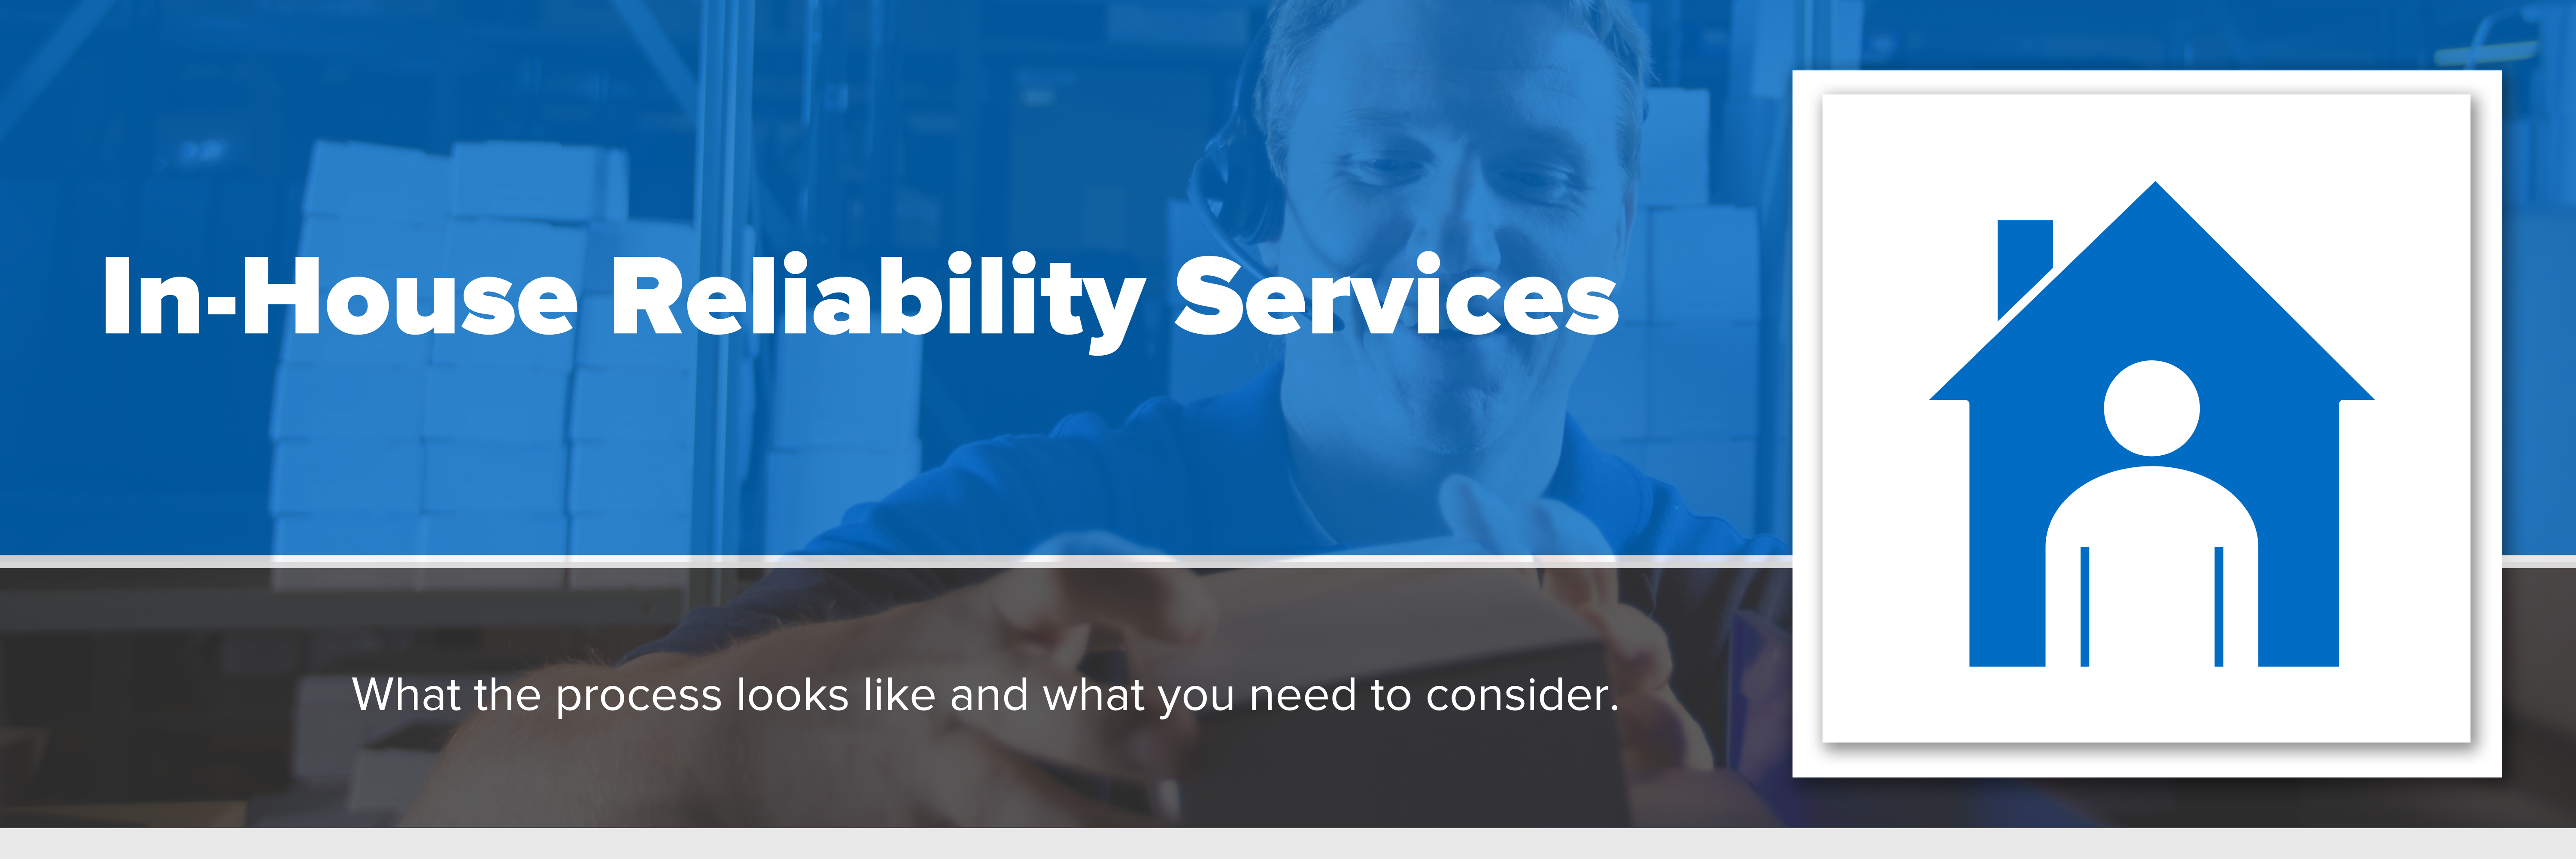 Header image with text "In-House Reliability Services"